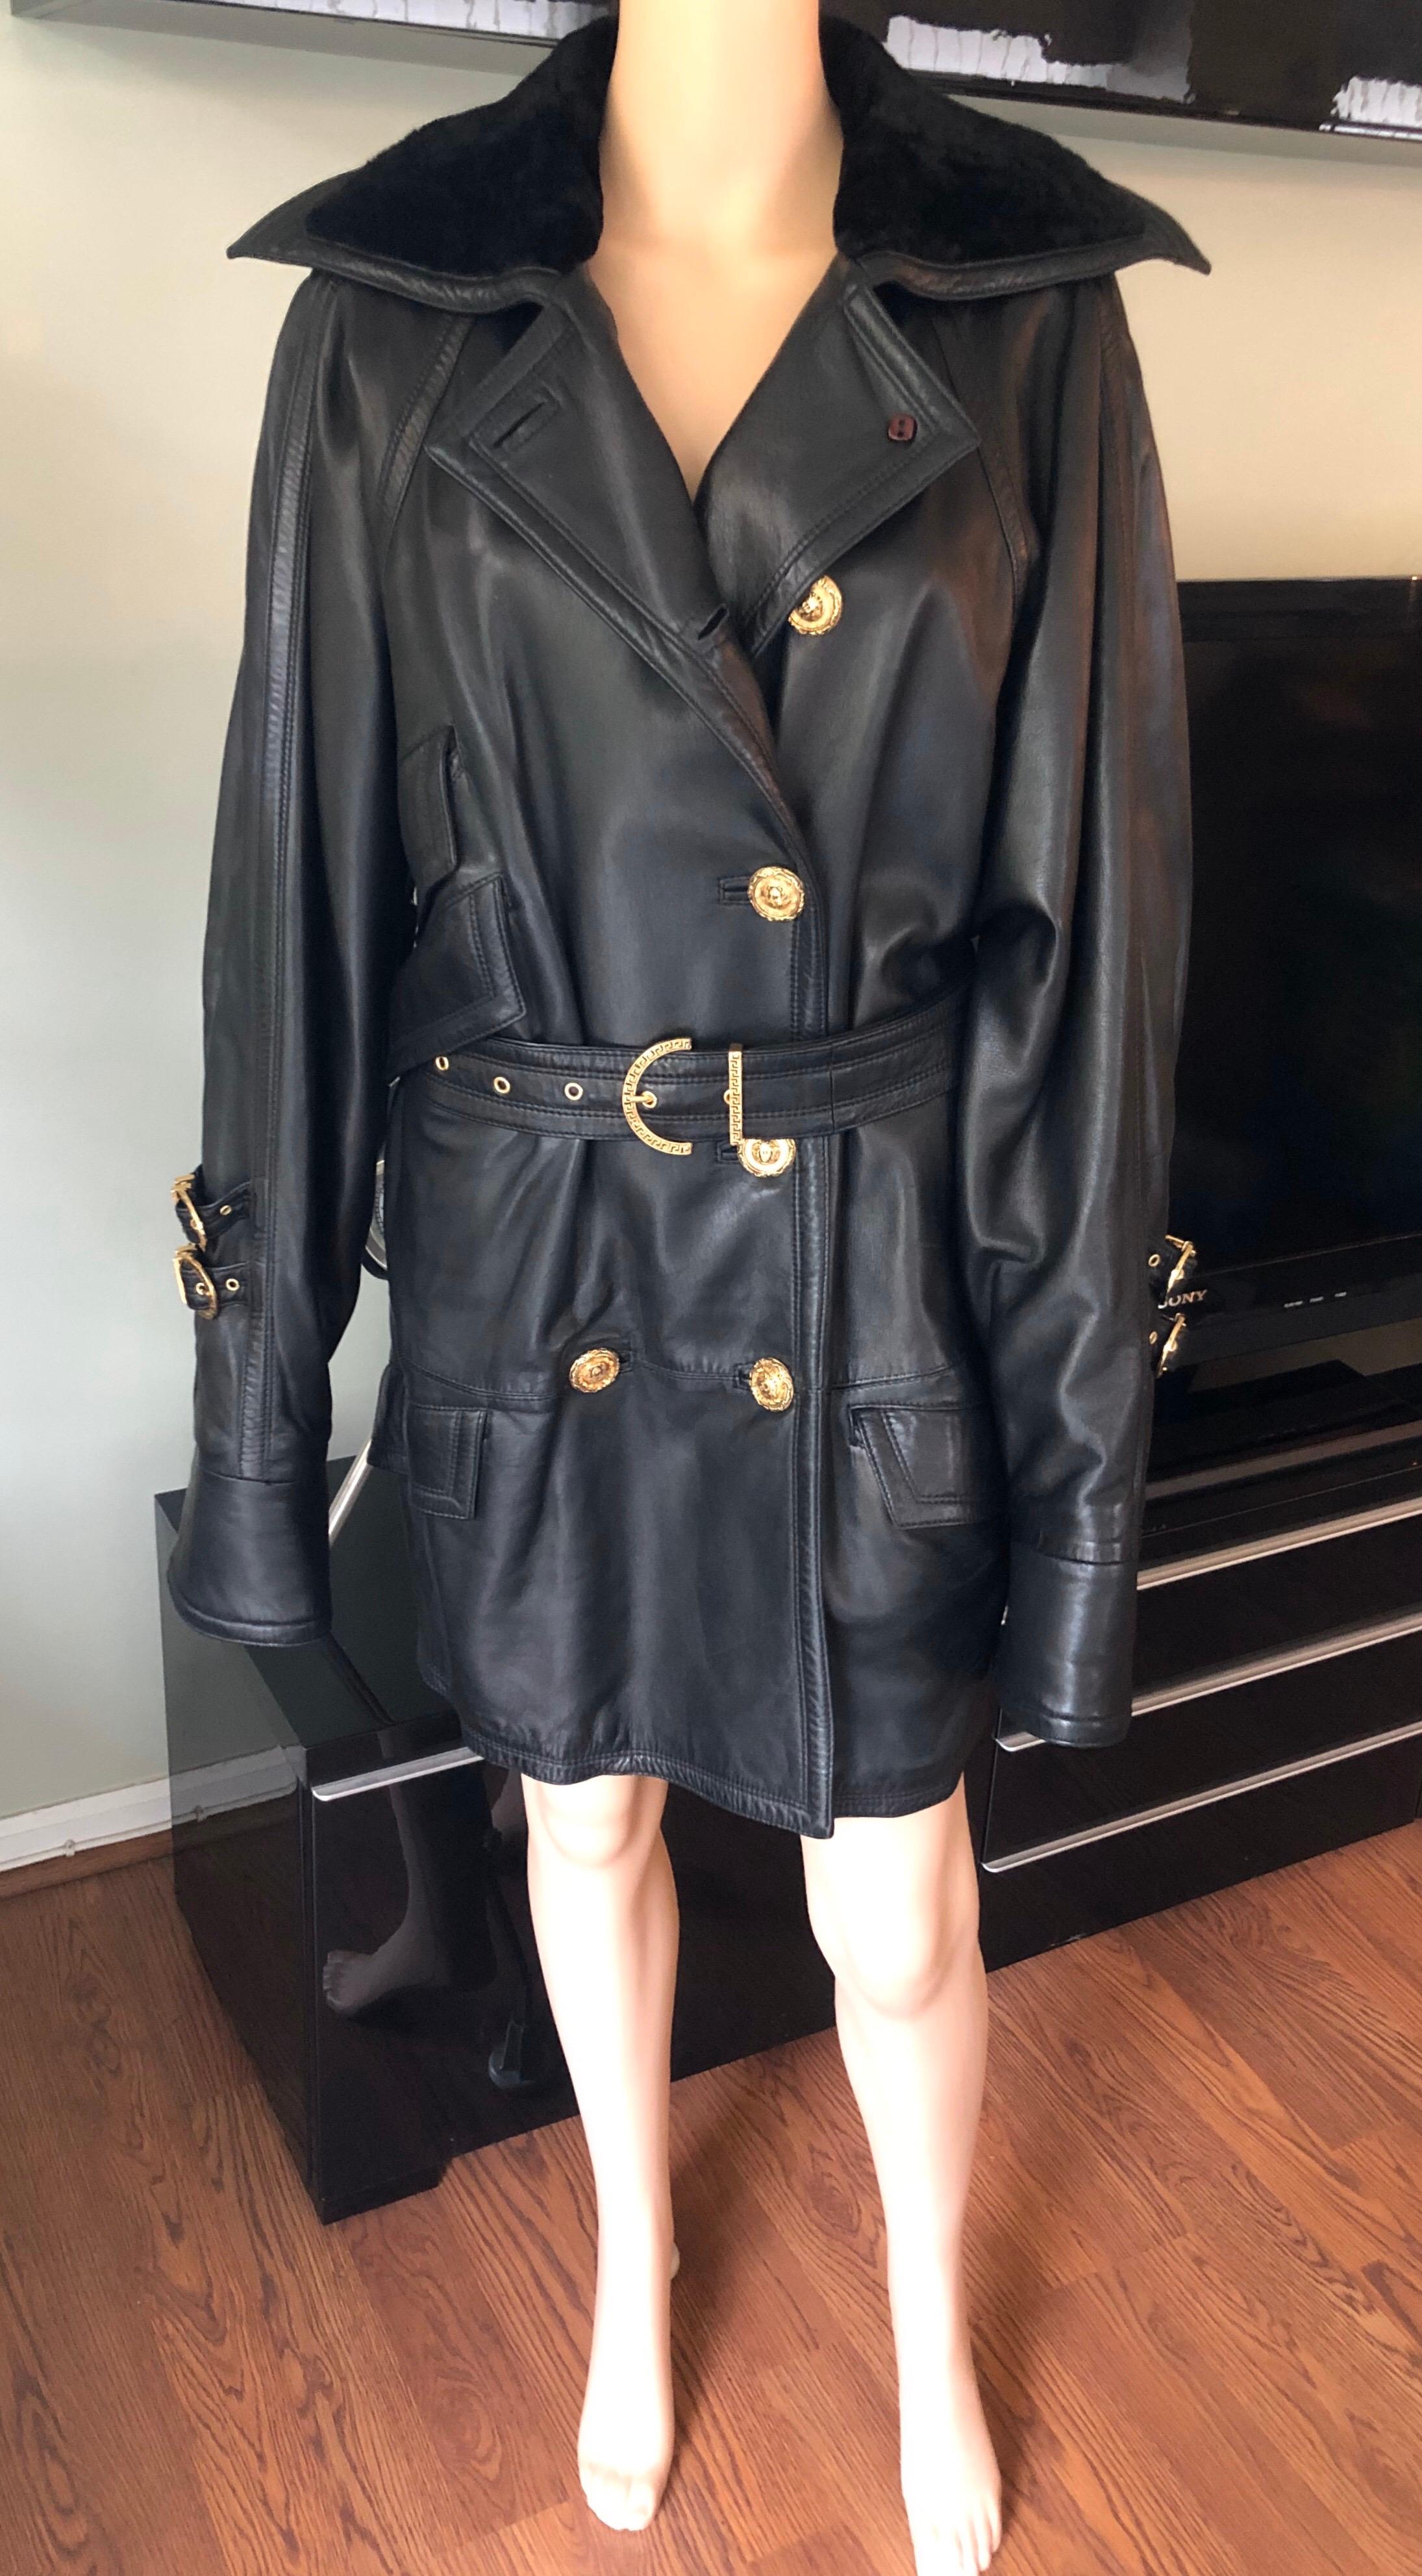 Gianni Versace c. 1990 Bondage Leather Belted Knee-Length Black Jacket Coat IT 44

Black Gianni Versace leather knee-length coat featuring four flap pockets at sides, buckled belt and double-breasted button closures at front.
